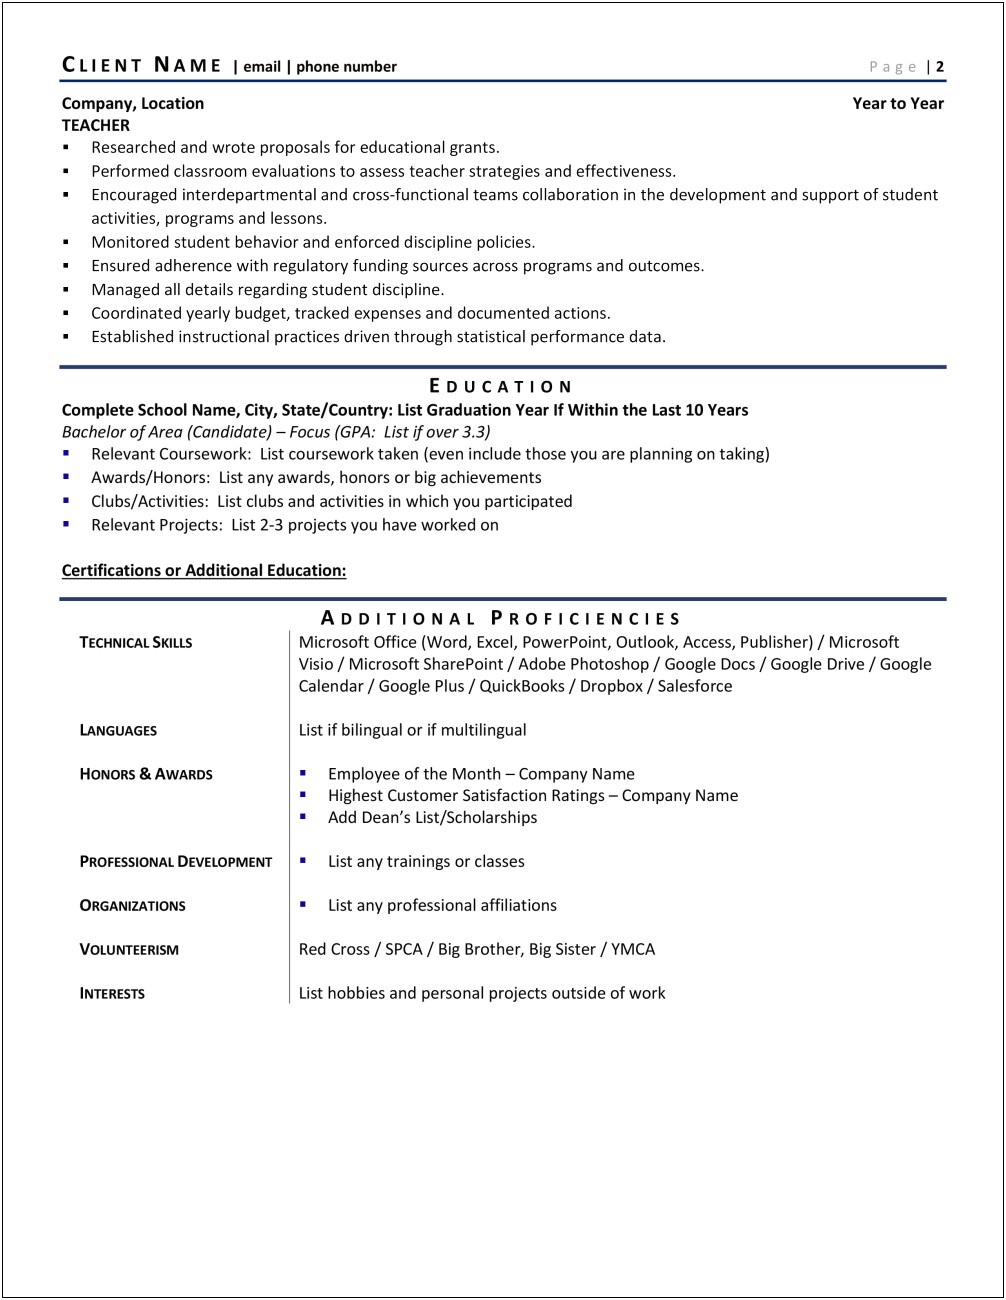 Resume Objective For Principal Position